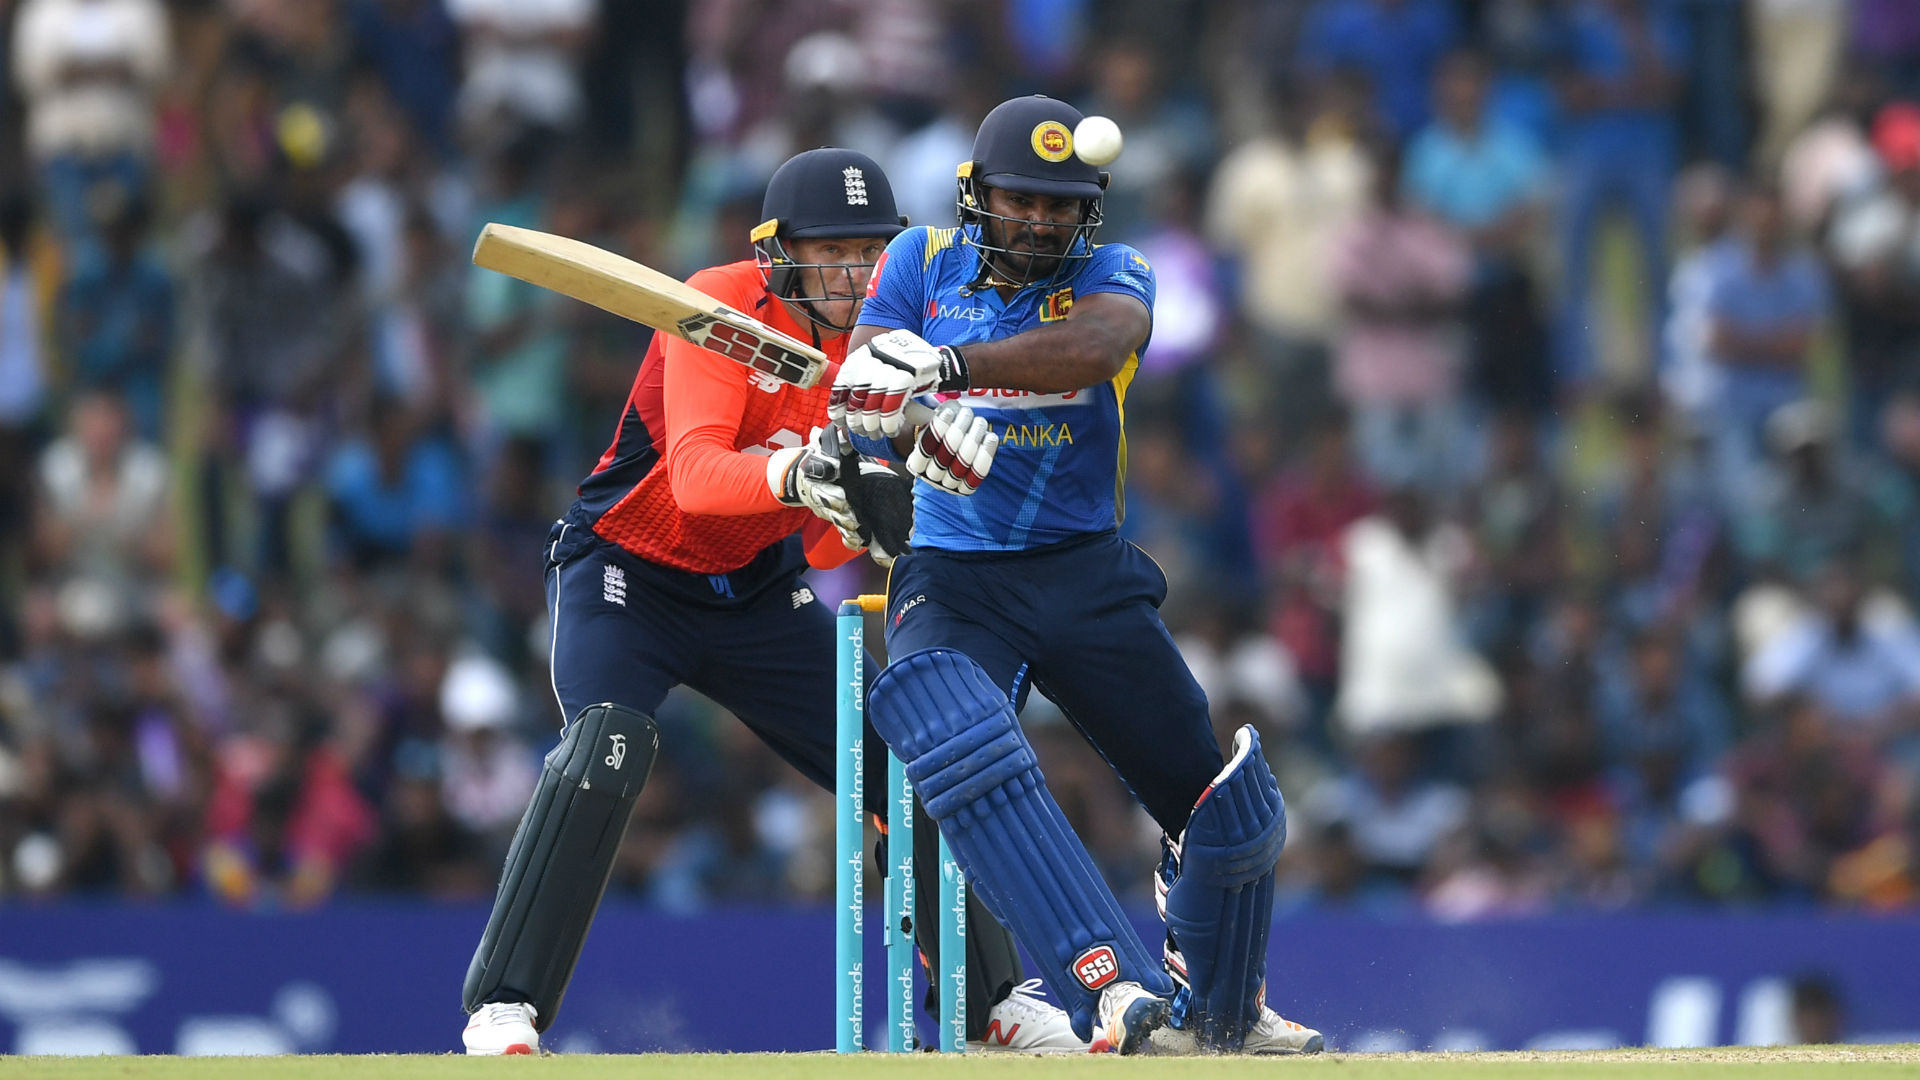 Kusal Mendis will get a chance to make up for his Asia Cup shortcomings after being recalled to Sri Lanka's ODI side.